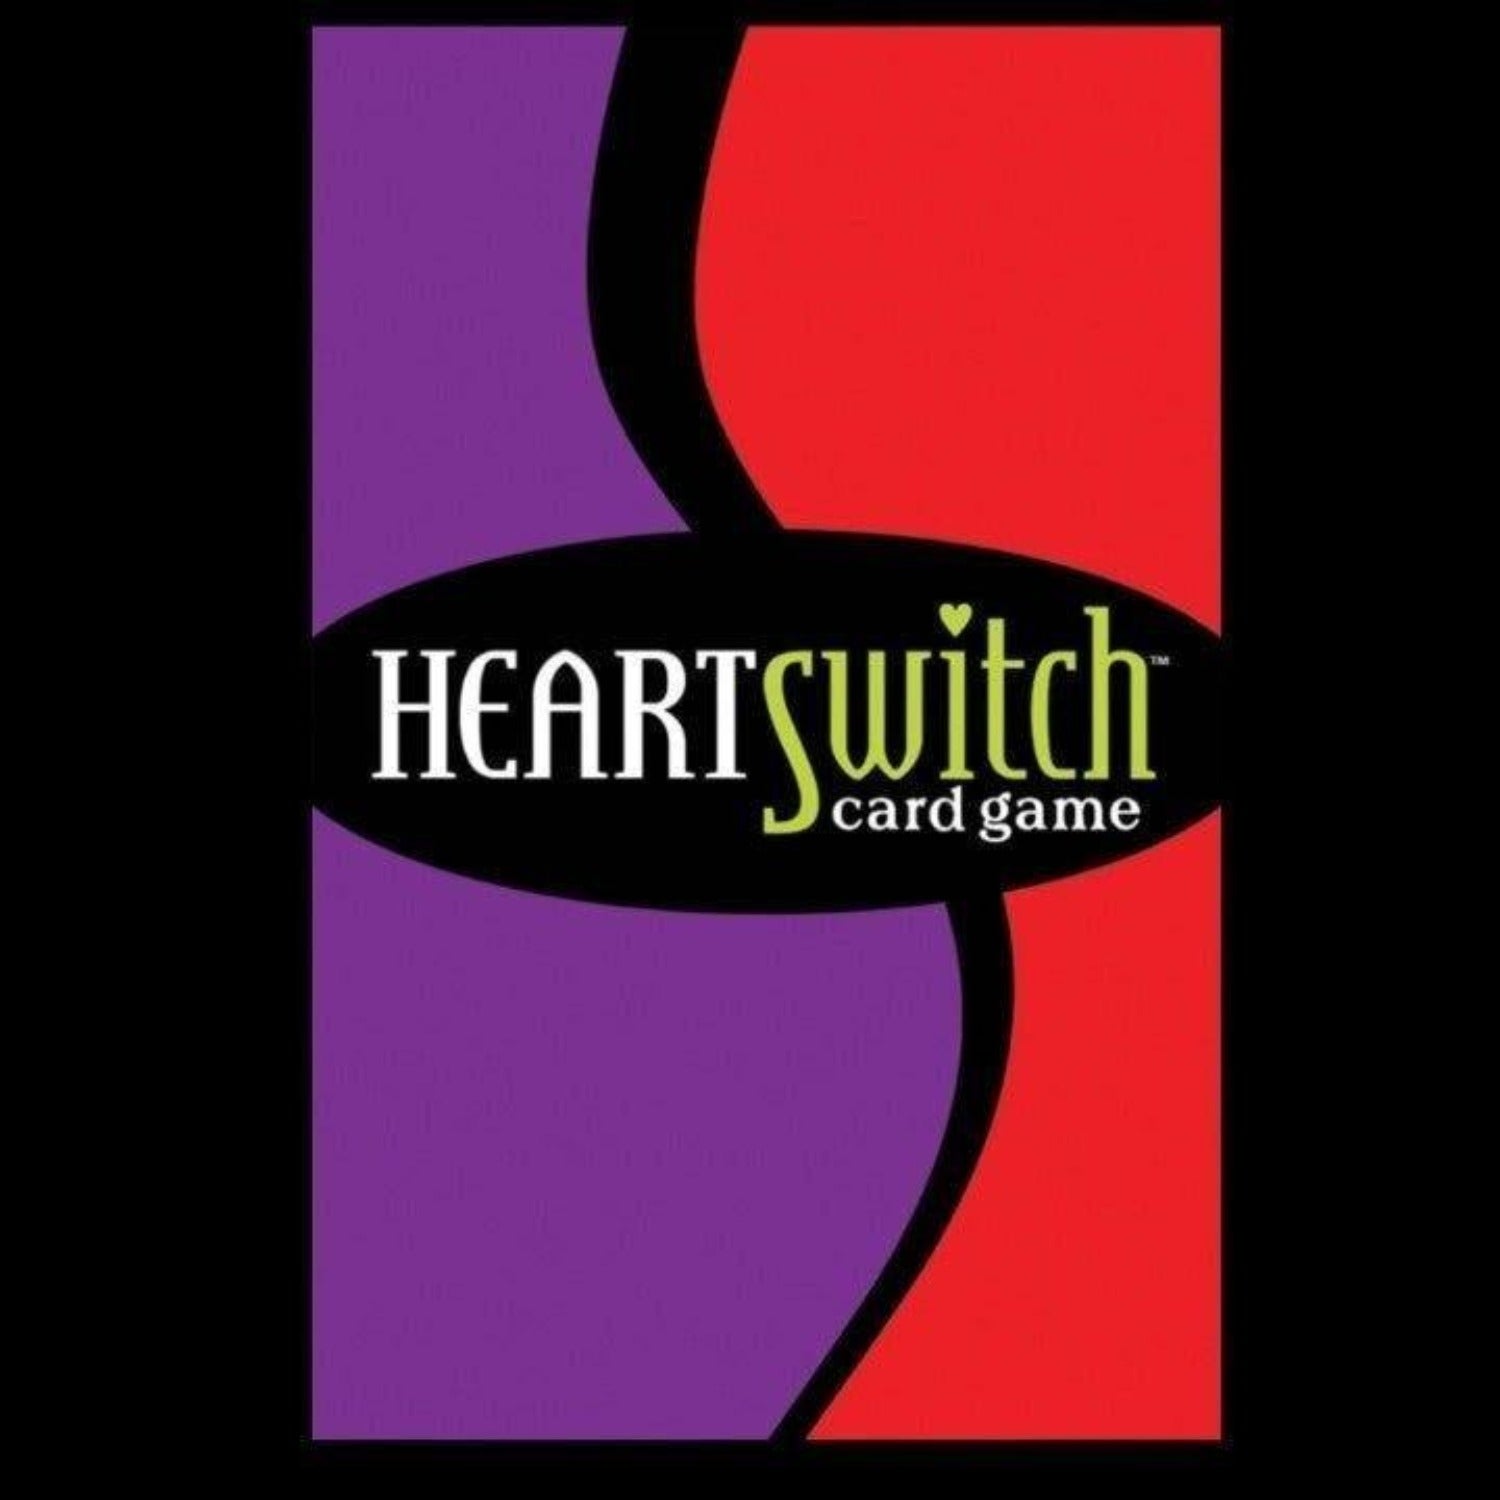 HeartSwitch Card Game